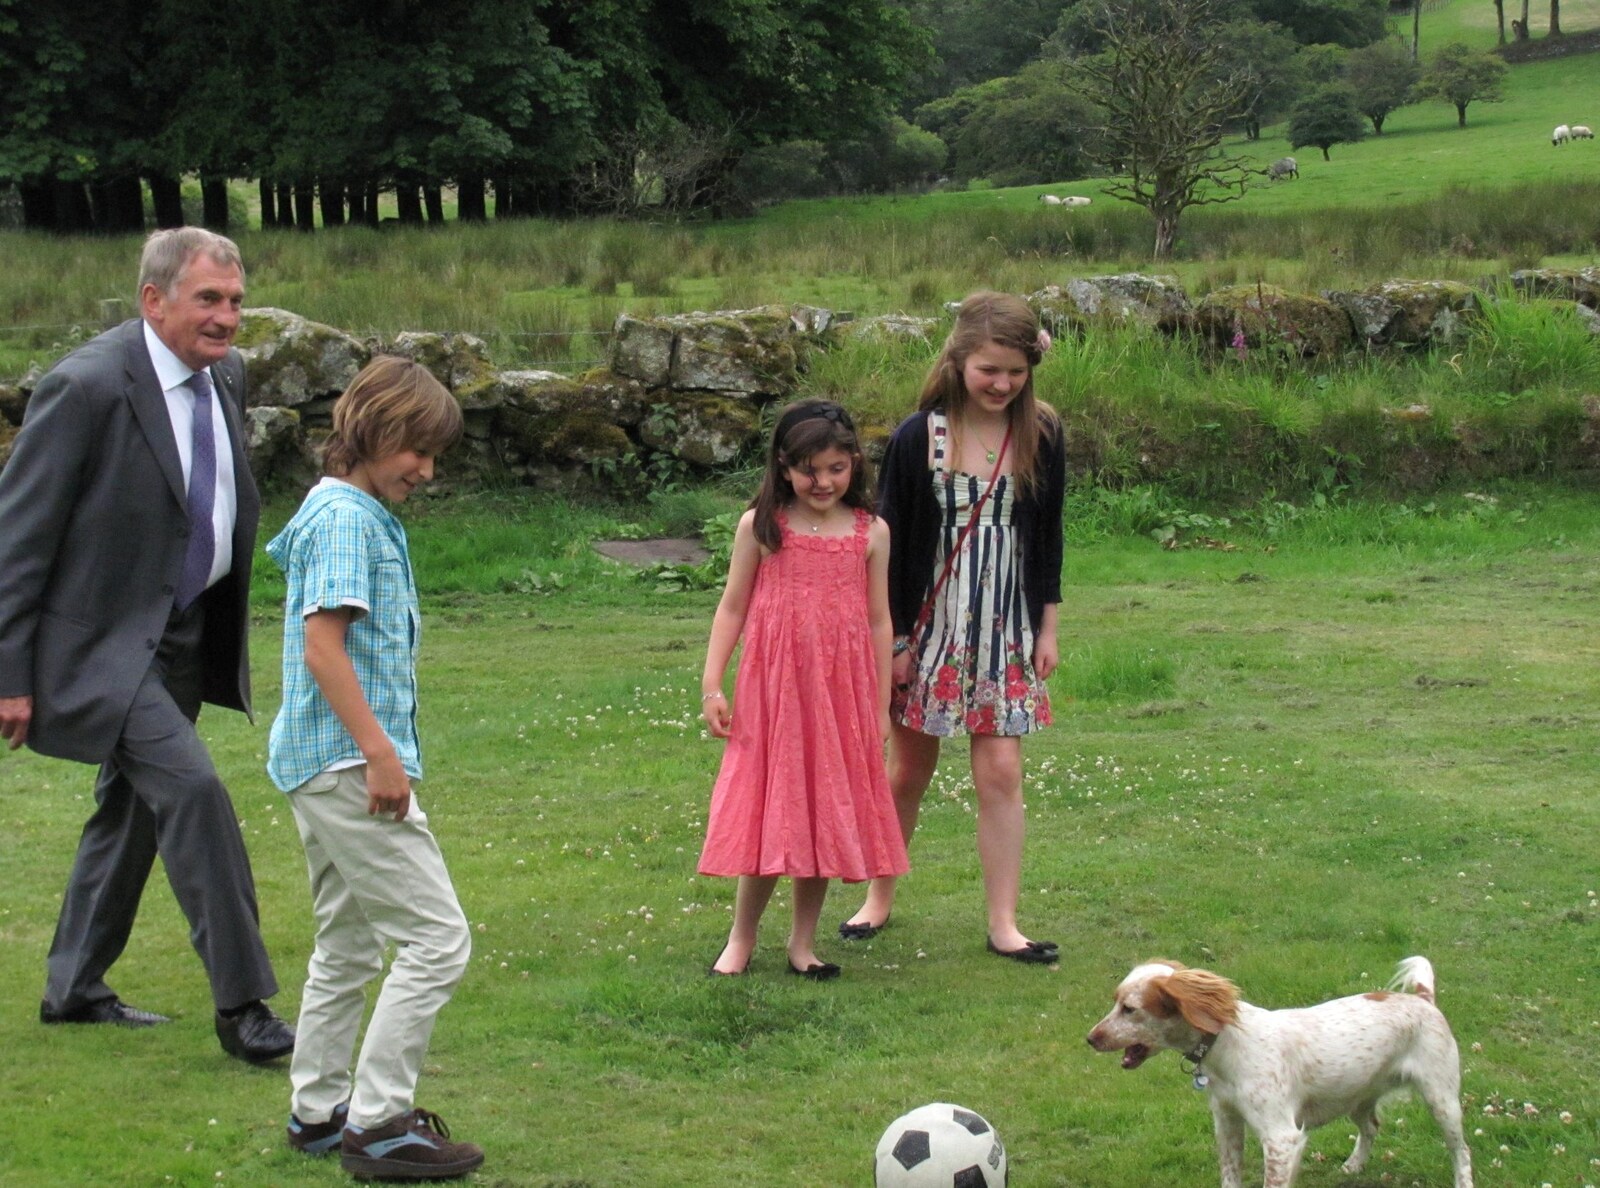 A dog gets involved from Mike's Memorial, Prince Hall Hotel, Two Bridges, Dartmoor - 12th July 2011